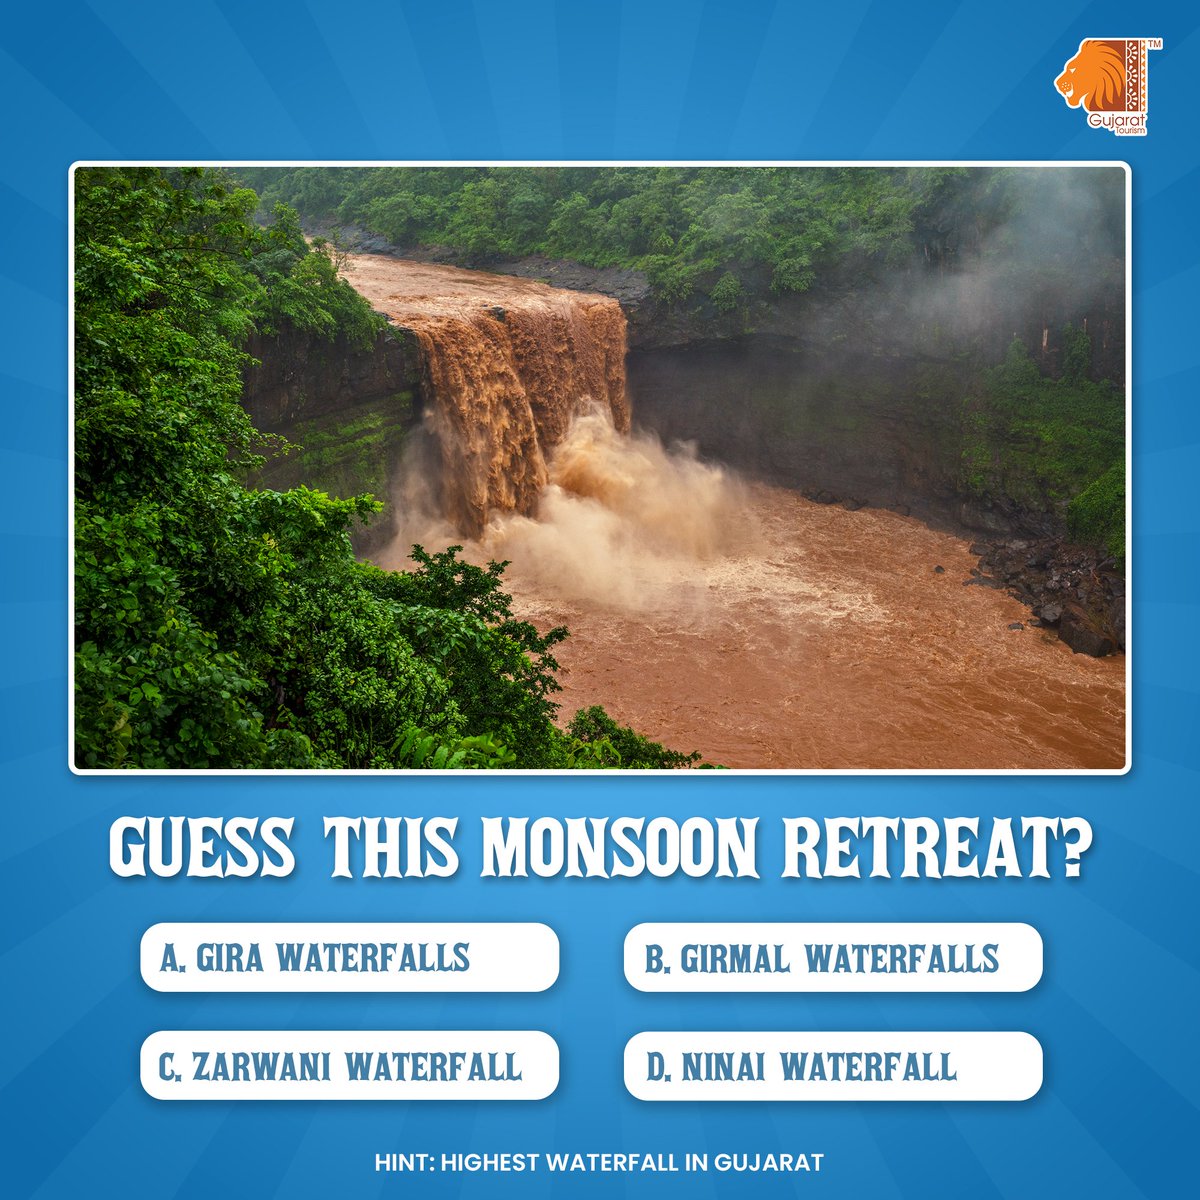 We are here with another quiz. Can you guess the name of this breathtaking waterfall?

Share your answers in the comment section. 

#gujarattourism #incredibleindia #dekhoapnadesh #Gujarat #TravelTrivia #GeographyChallenge #IconicLandmarks #TestYourKnowledge #FunTrivia #quiz